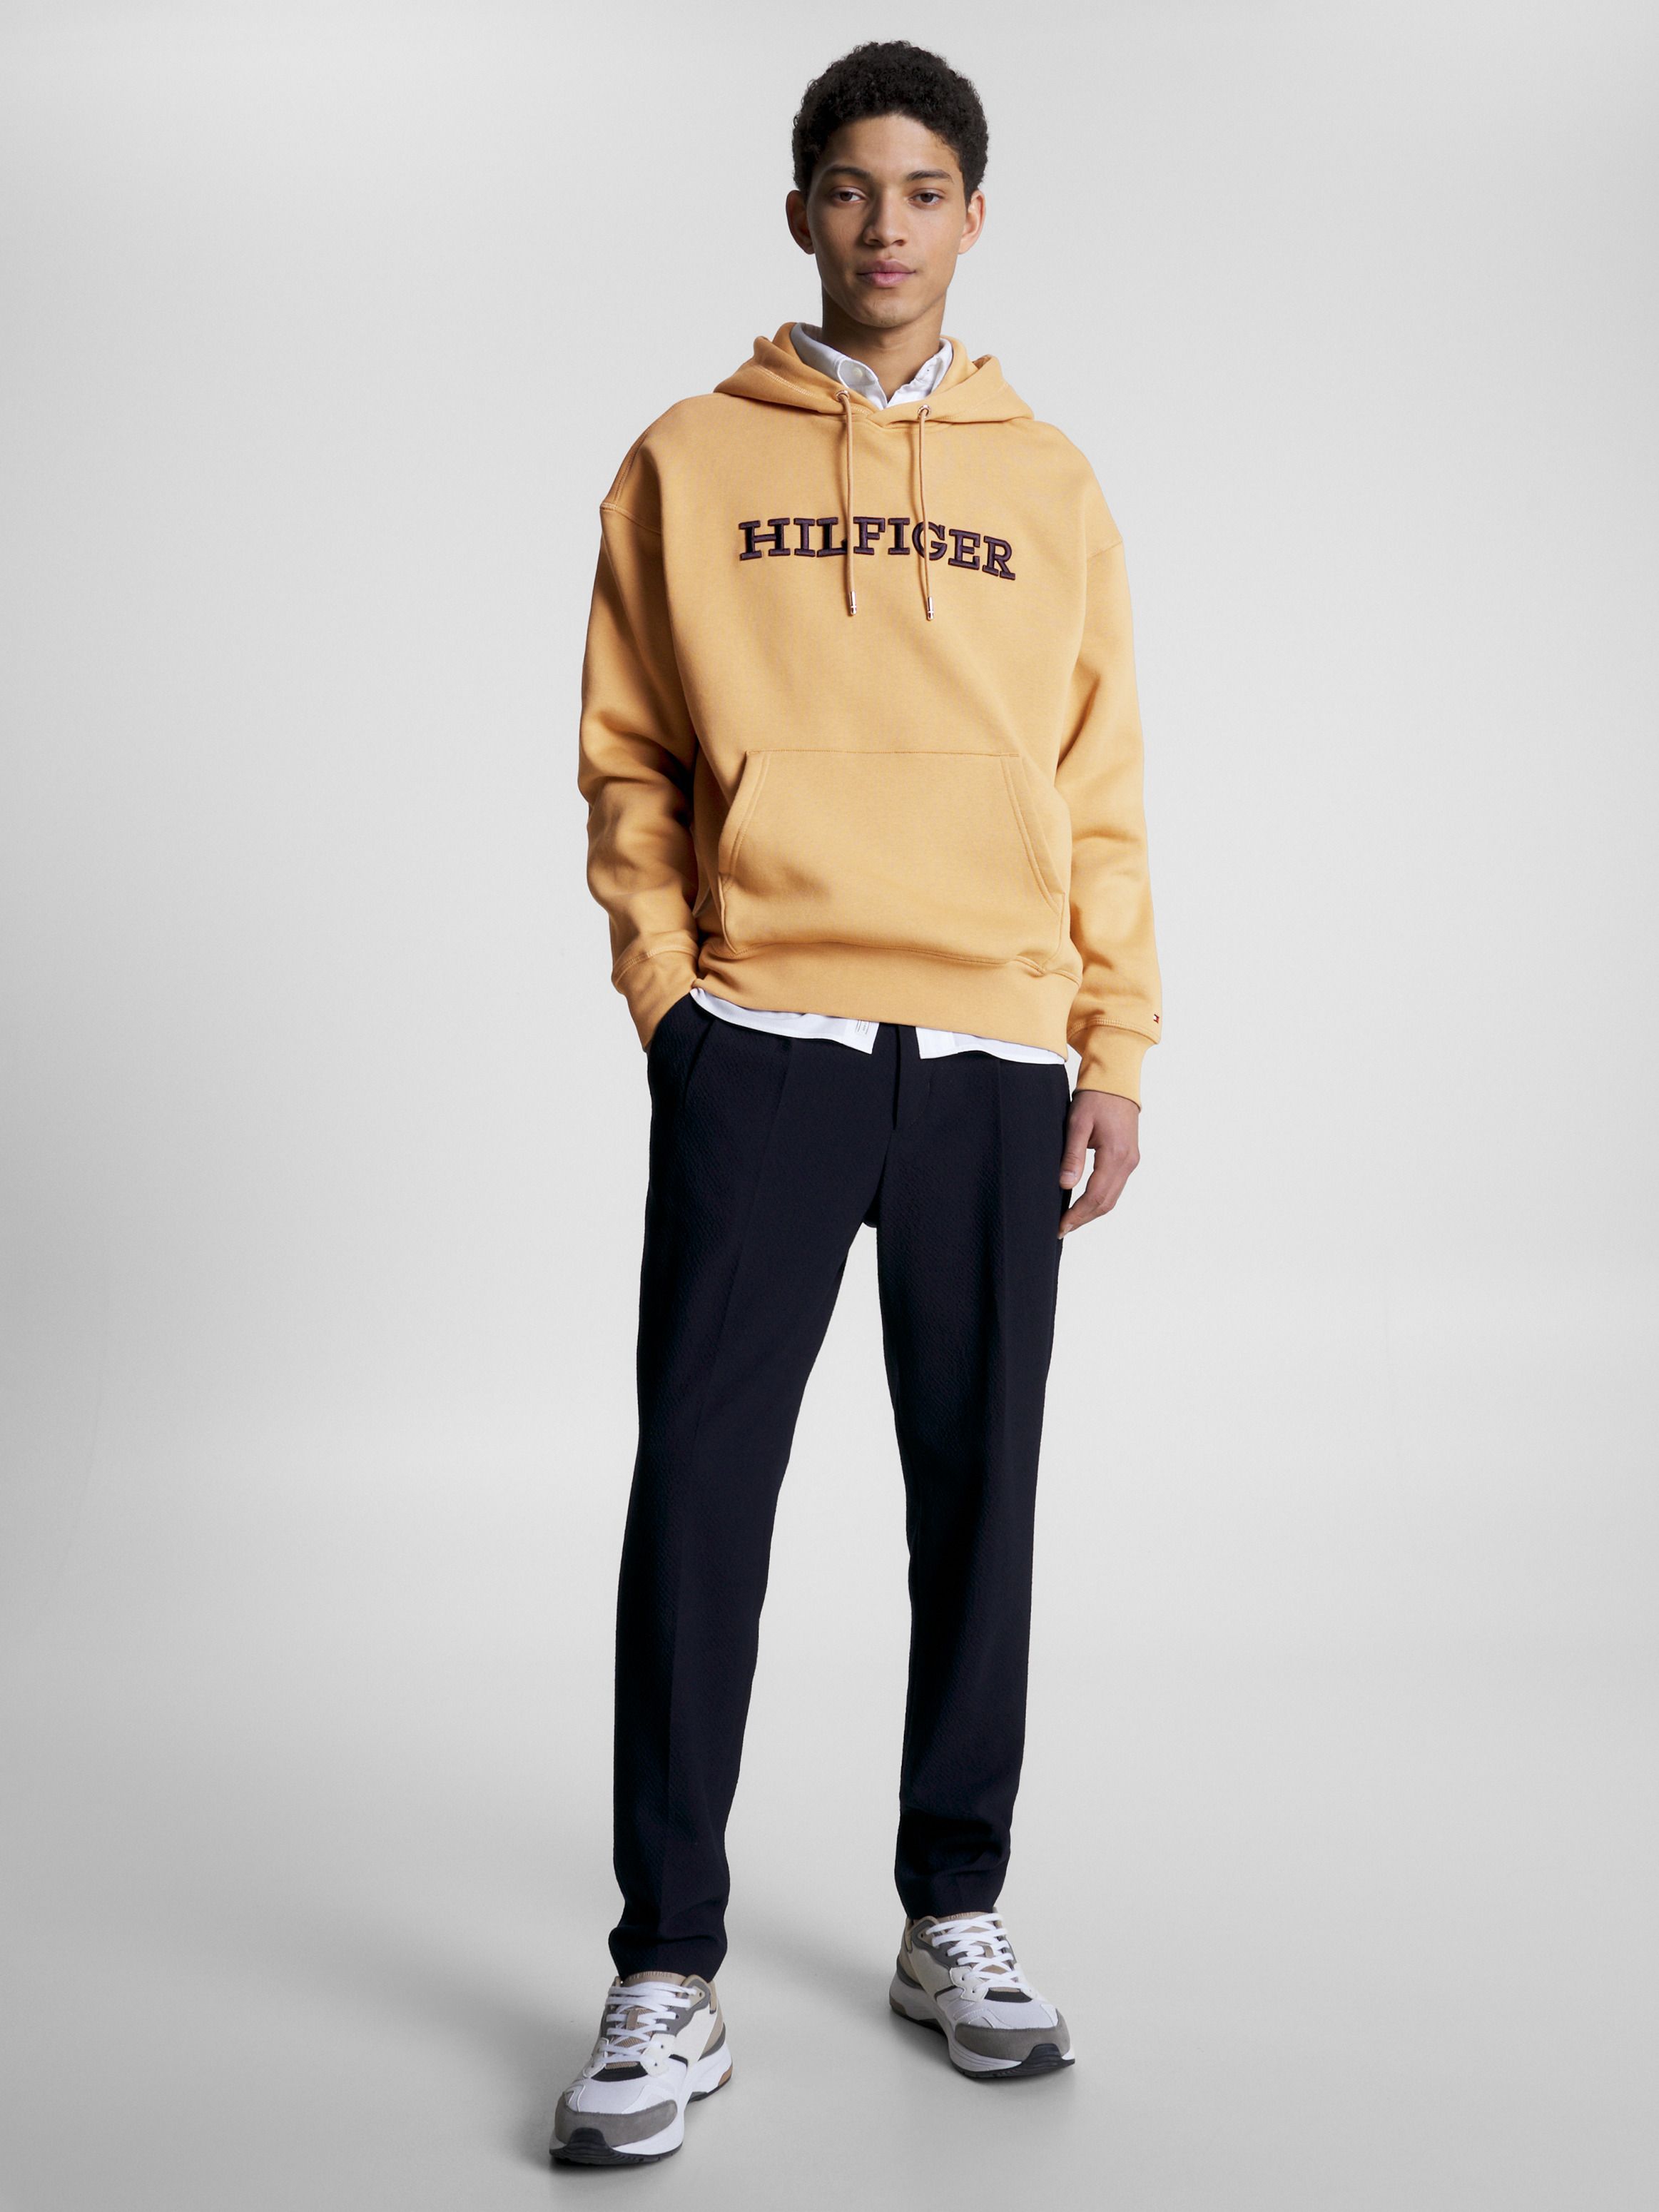 Hilfiger Monotype Embroidery Archive Fit Hoody | Tommy Hilfiger